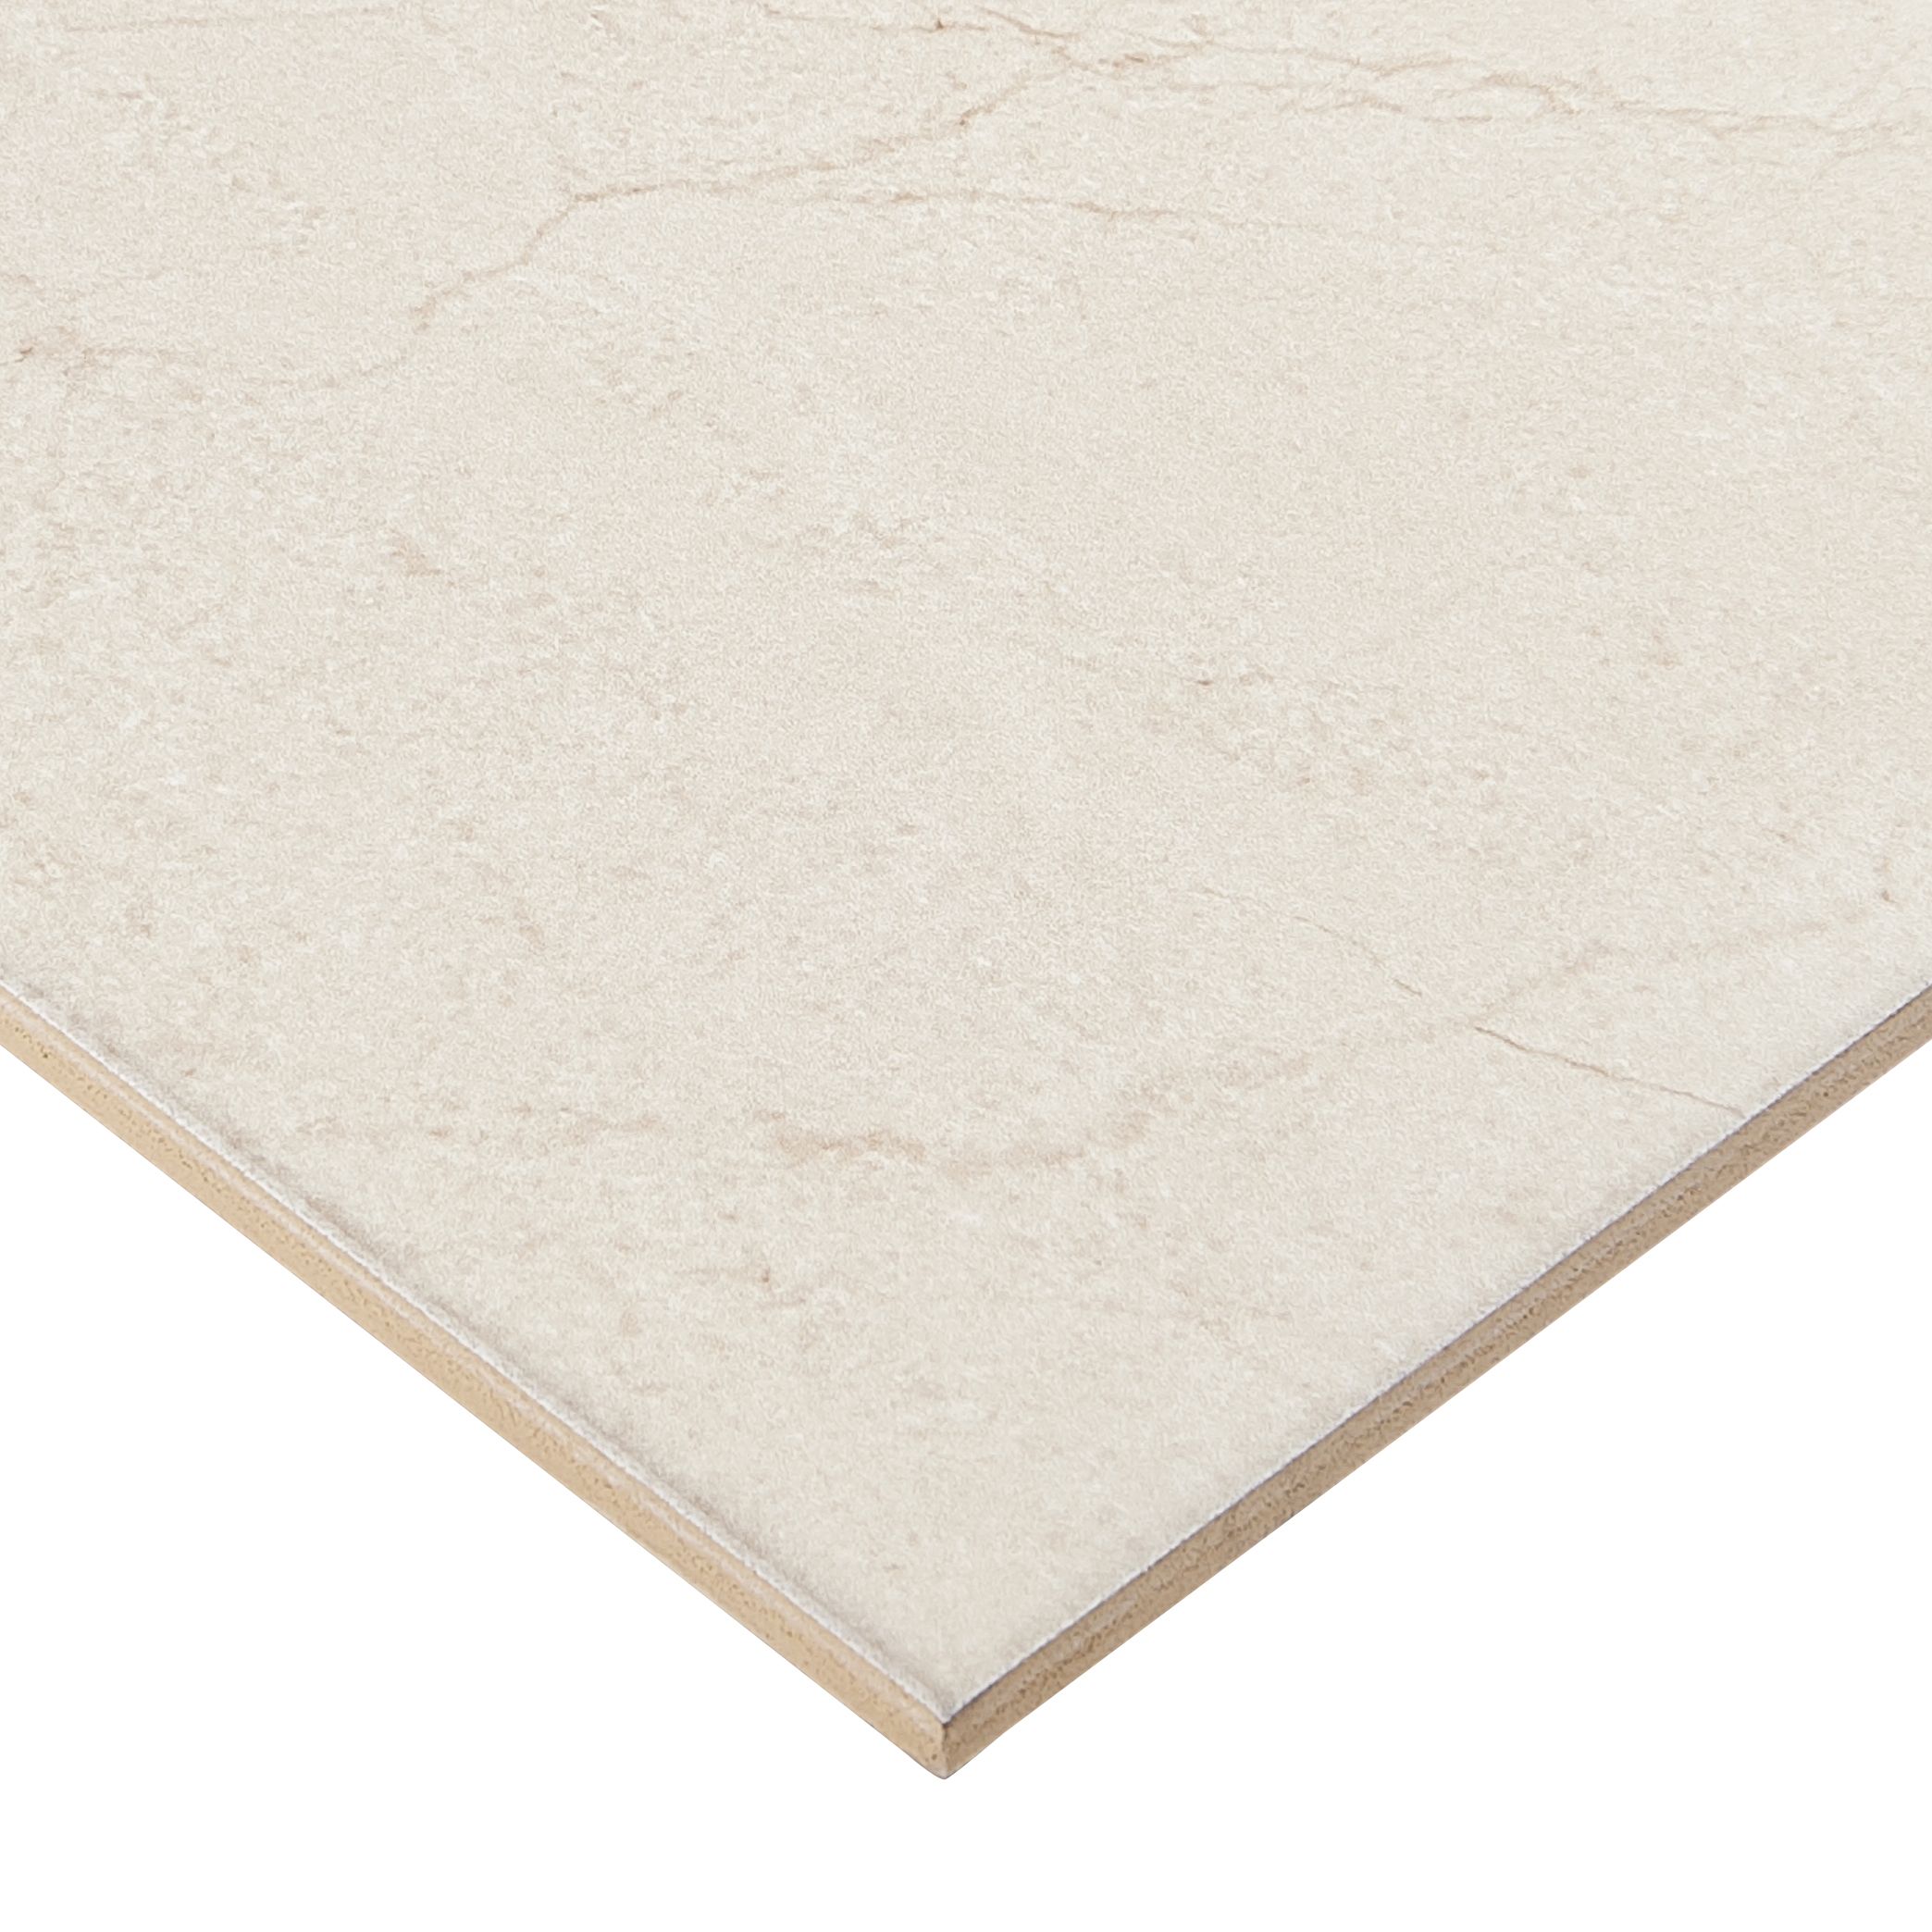 Elegance marble Cream Gloss Marble effect Ceramic Indoor Wall Tile, Pack of 7, (L)600mm (W)200mm